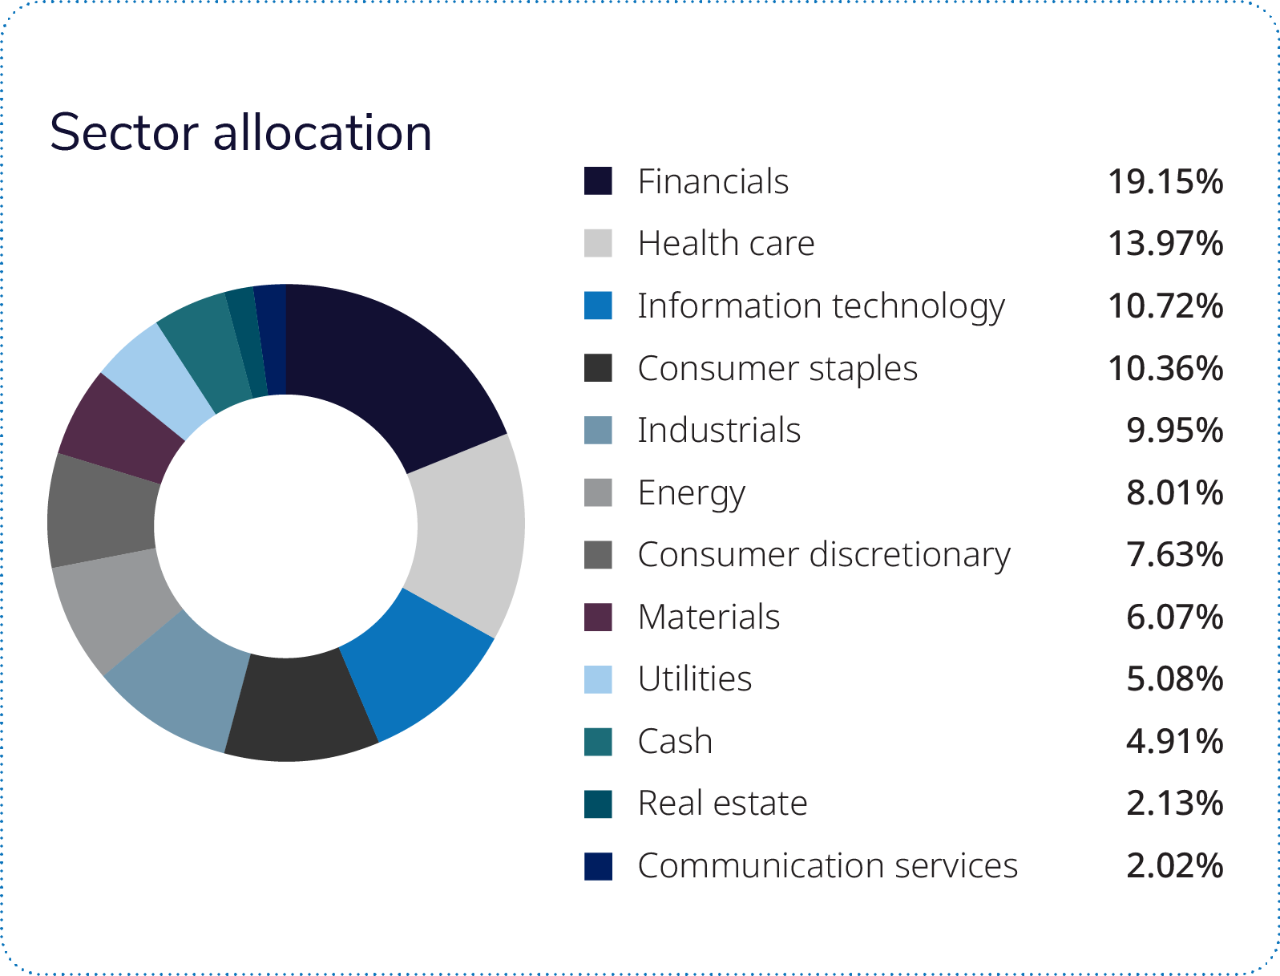 Just over half of the fund is comprised of four sectors: financials, health care, industrials and information technology.